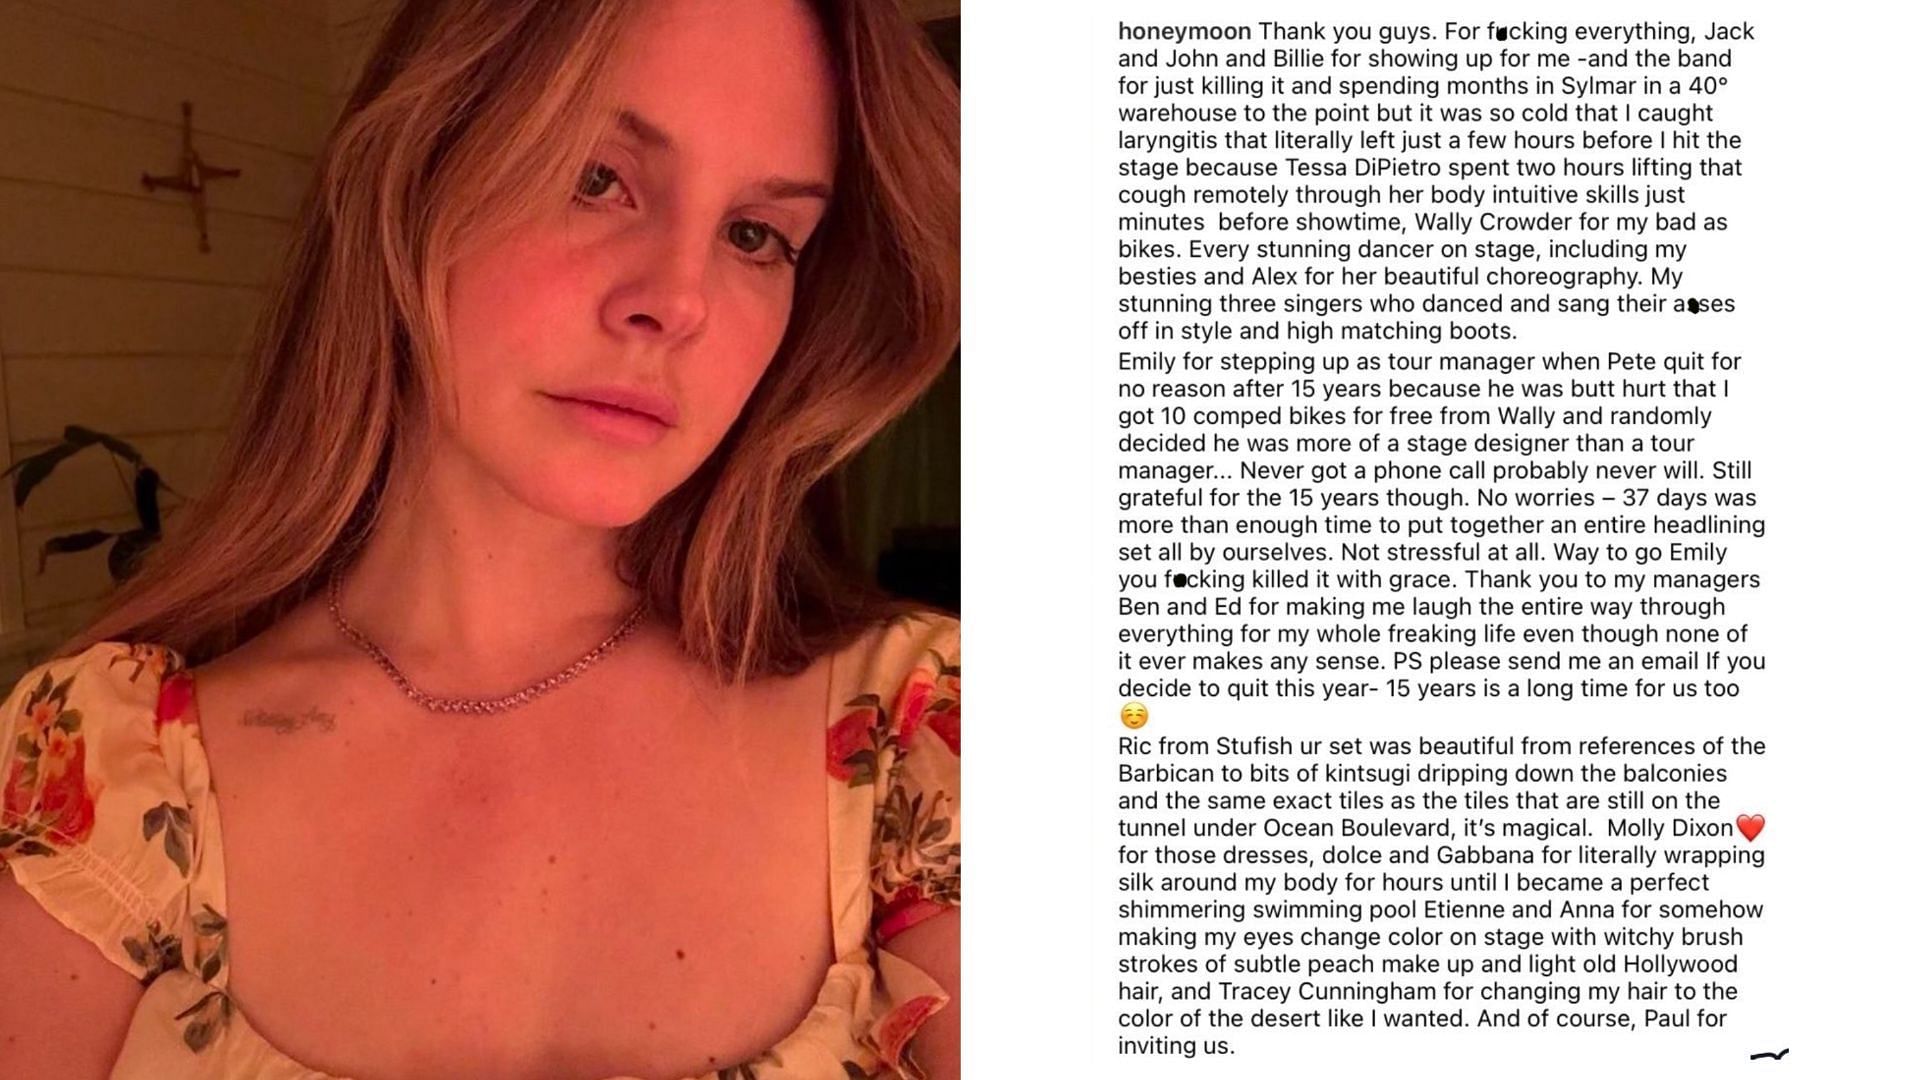 Lana Del Rey&#039;s post about her concert and manager. (Images via Instagram/@honeymoon)